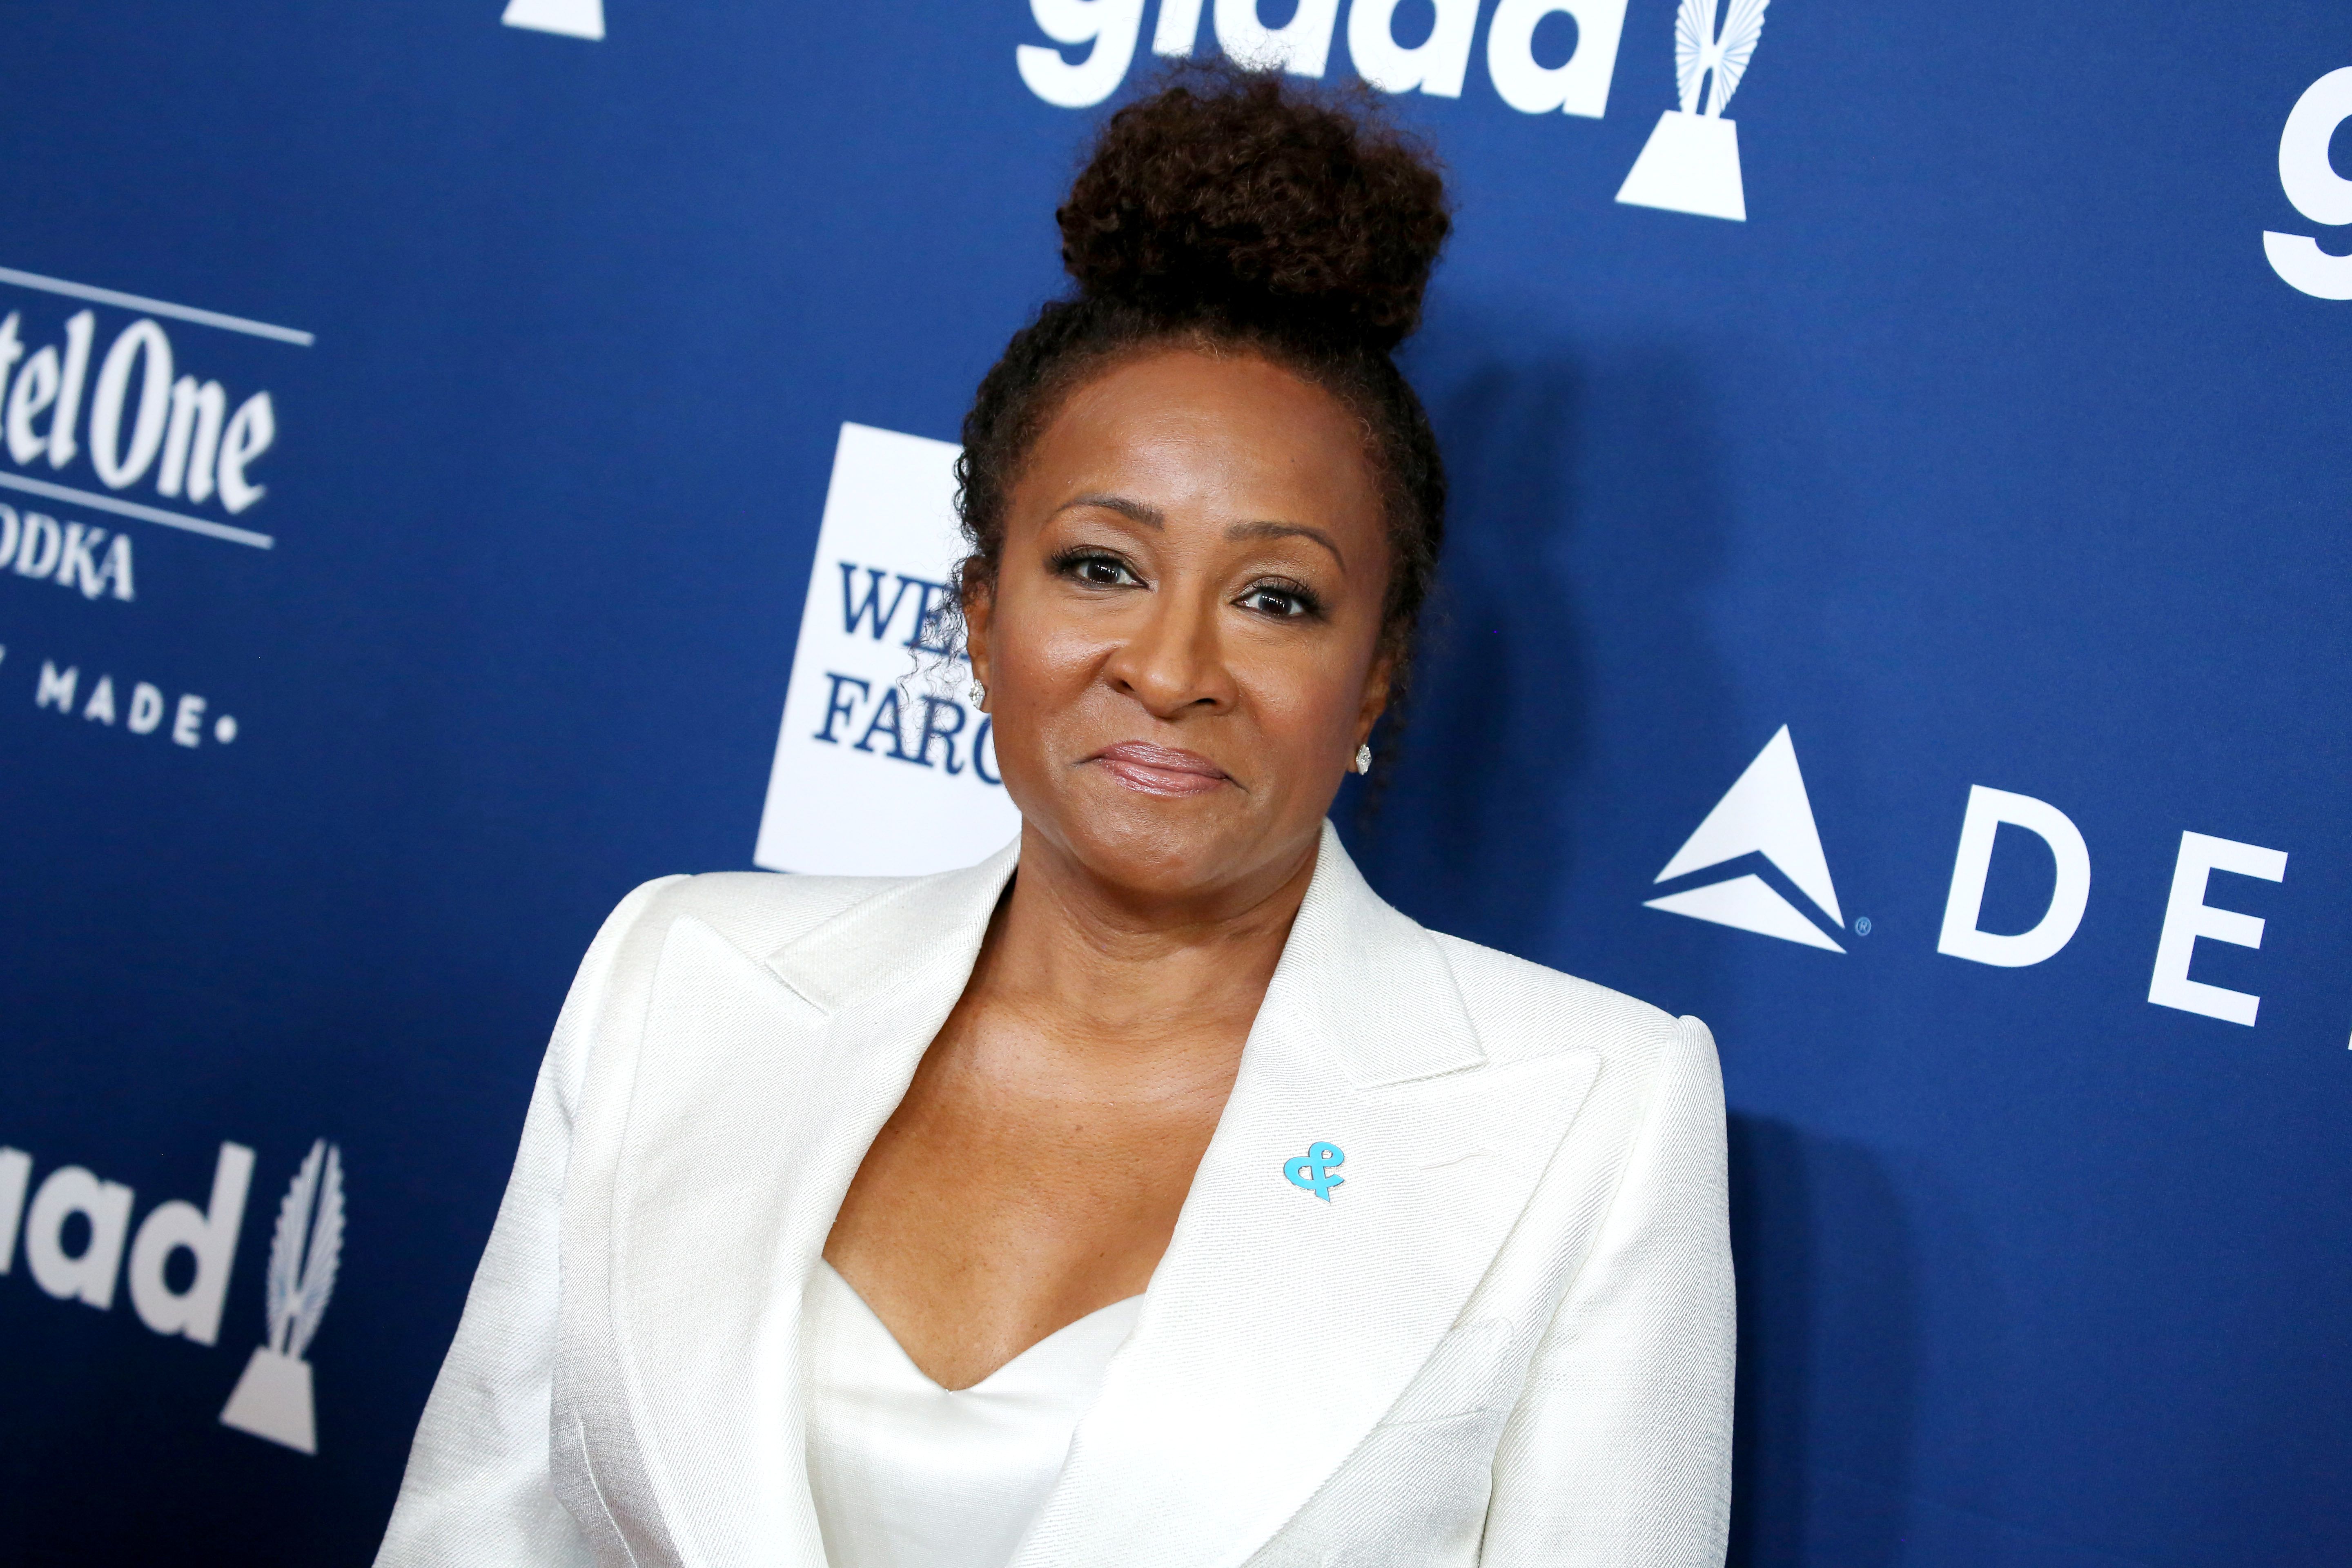 Wanda Sykes and Mike Epps are set to lead a brand new comedy series for the...